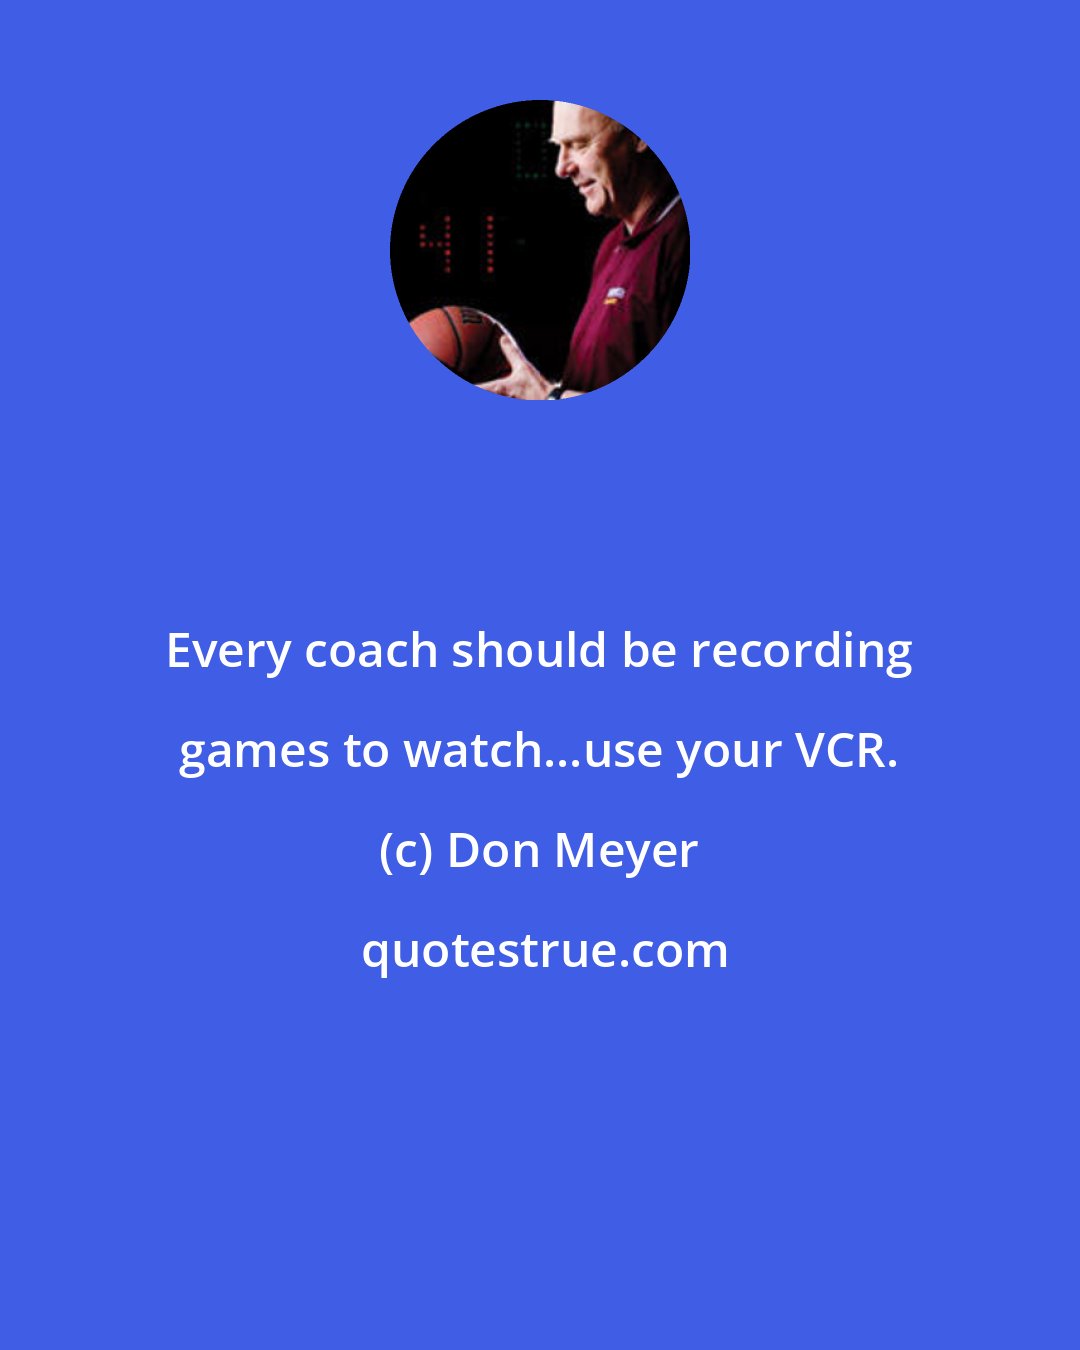 Don Meyer: Every coach should be recording games to watch...use your VCR.